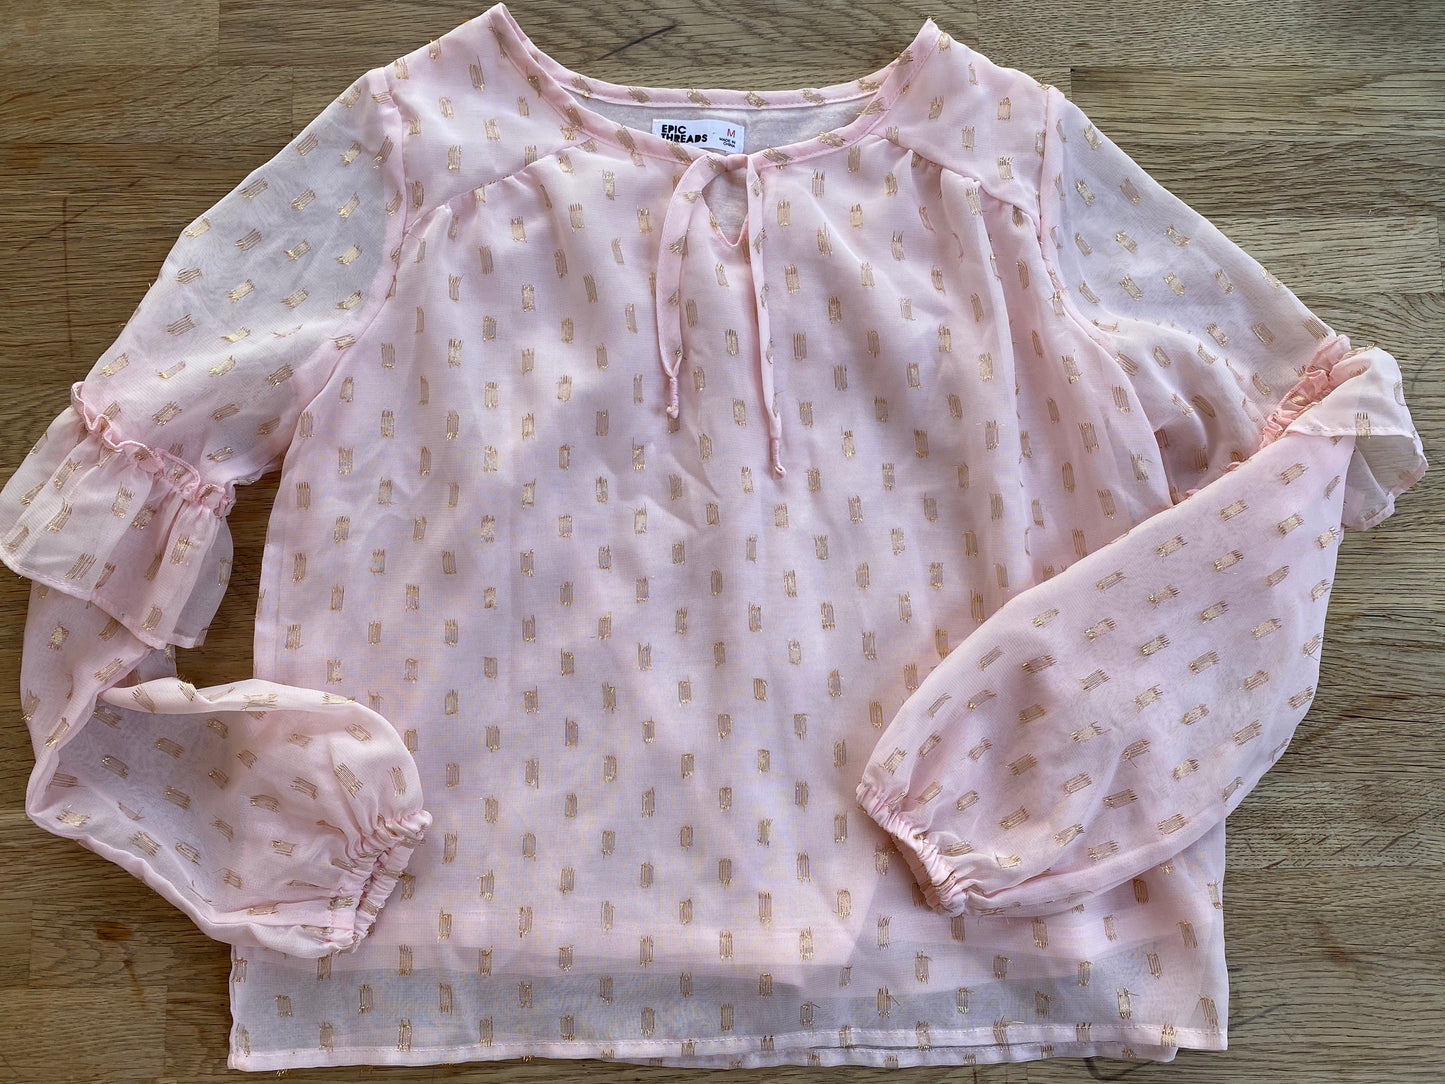 Pink, Shimmery Tunic Top - Size M